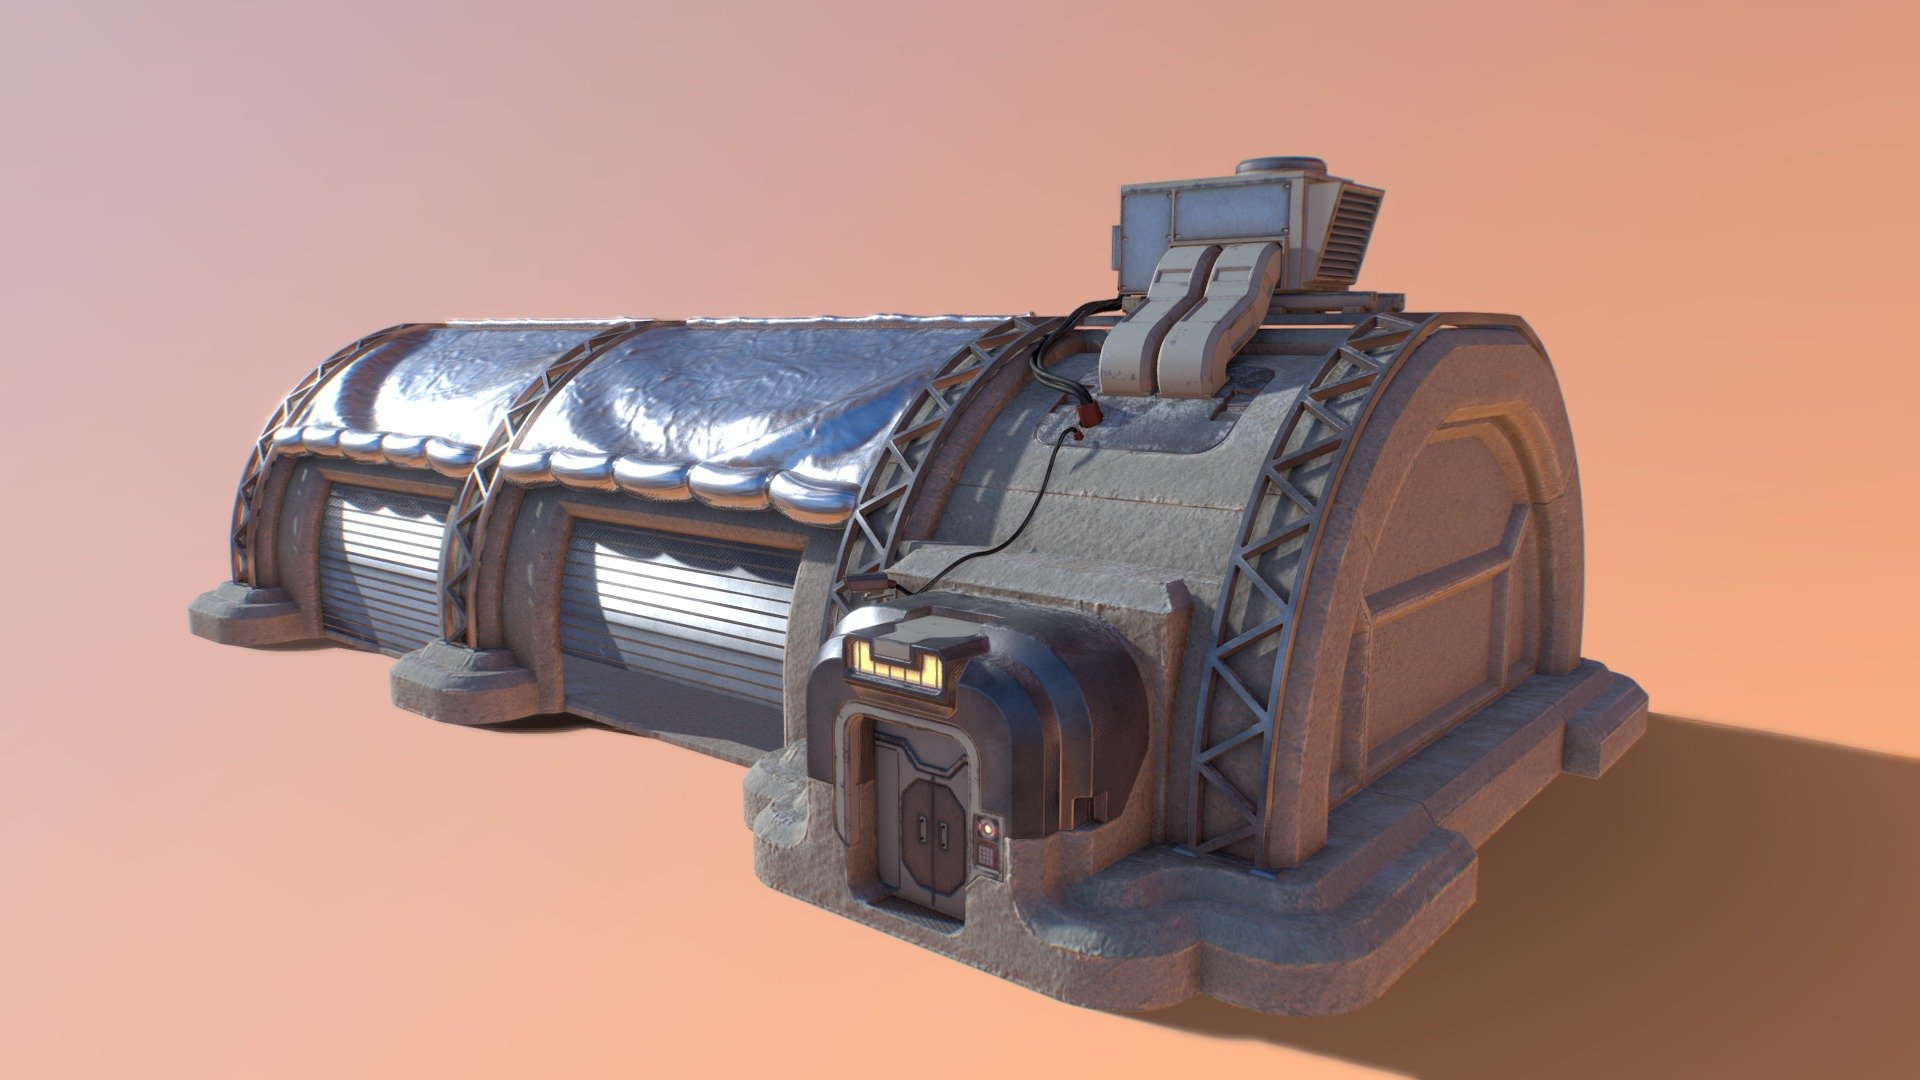 Would love to see what you use this thing for if you use this somewhere!

Blender Fluent and modeling cloth addon practice on buildings and using id maps baked in blender in substance designer. 

blender, substance painter, substance designer used 3d model